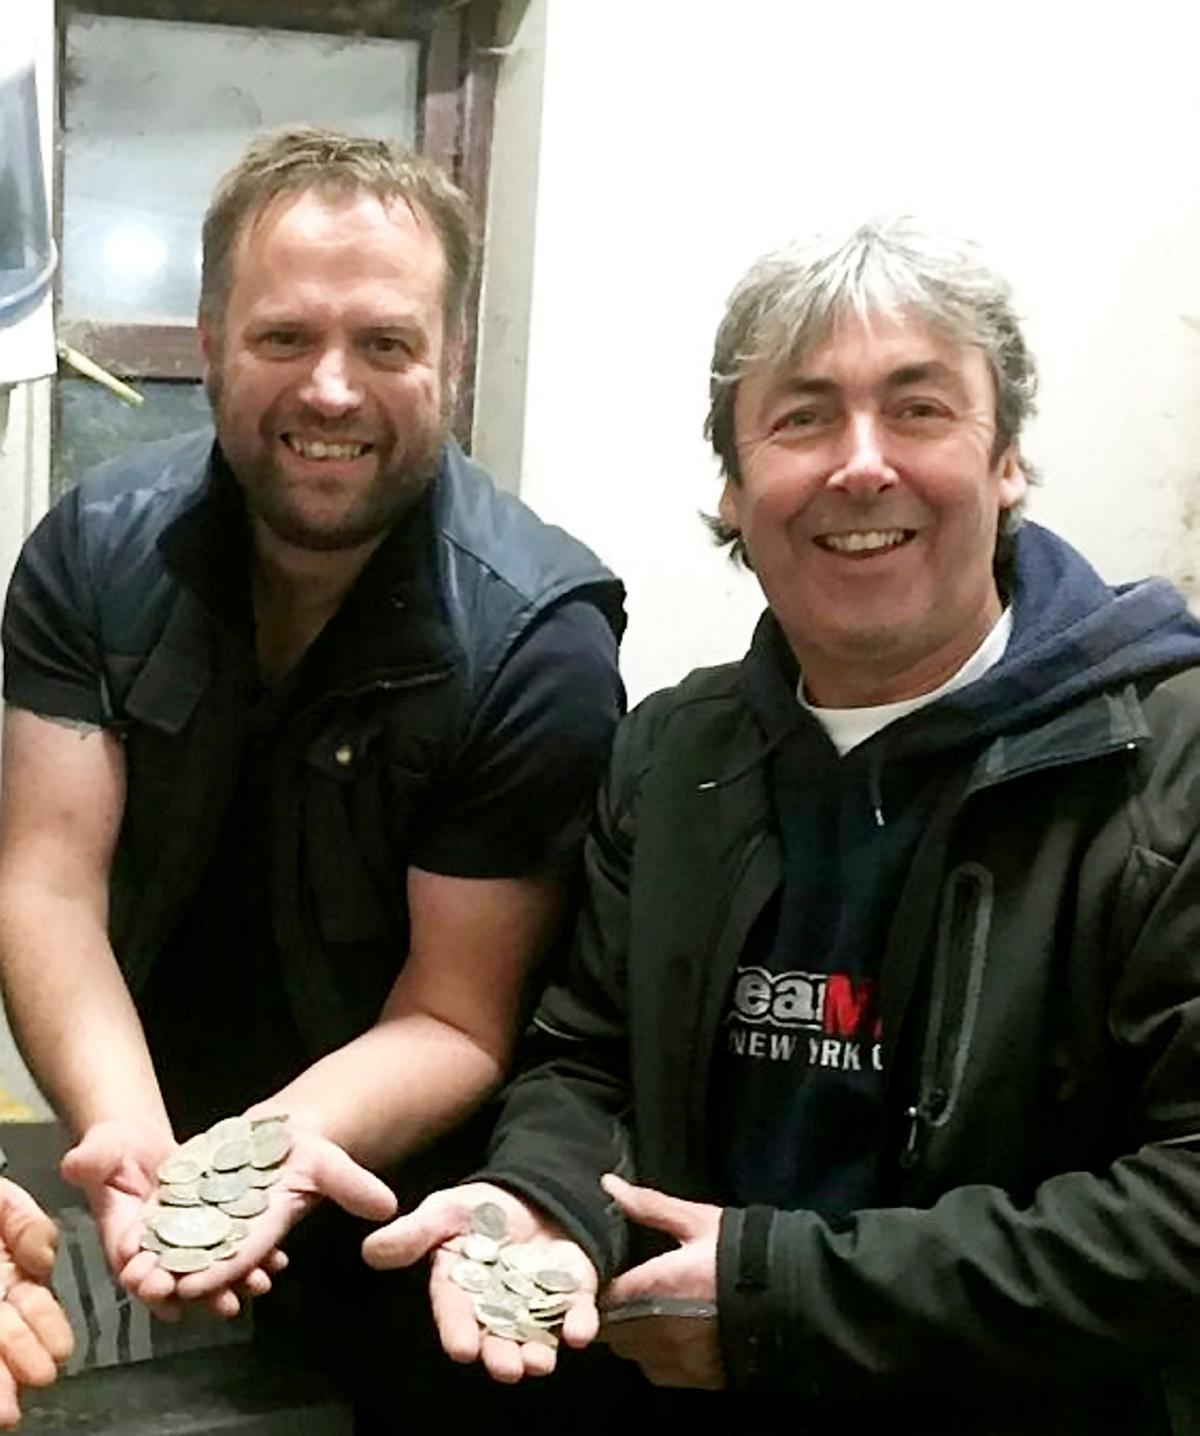 Two metal detectorists, Paul Raynard (L) and Michael Gwynne (R) discovered a hoard of fortune while finding a friend's lost wedding ring. (©SWNS)